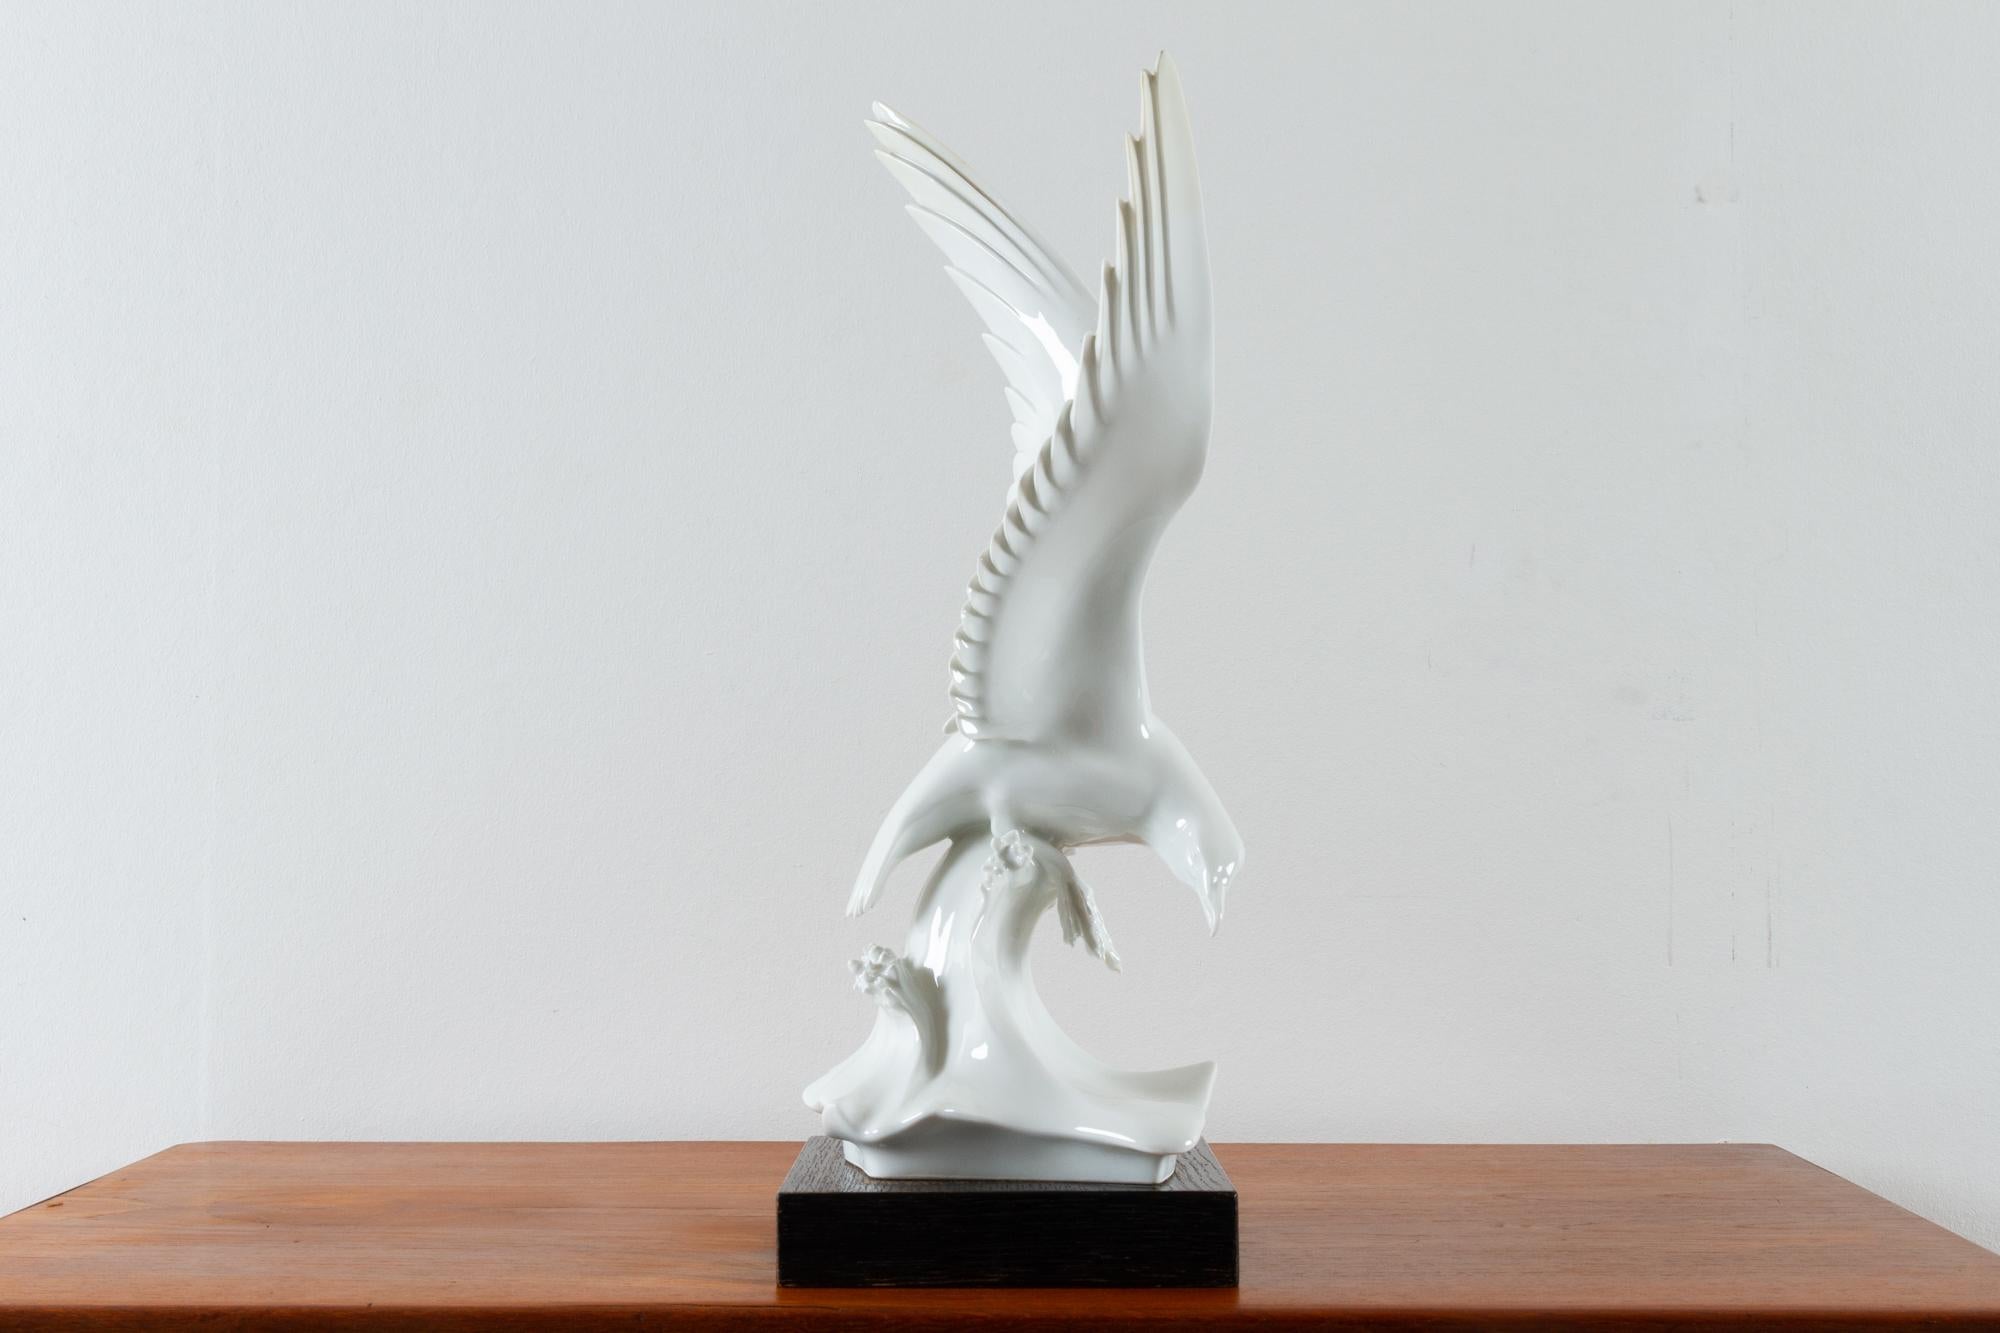 Vintage porcelain bird figurine by Max Esser for Meissen, 1930s
German figurine in white porcelain mounted on a black wooden base depicting a seagull spreading its wings above a wave. Very expressive and dramatic pose.

Factory second due to a